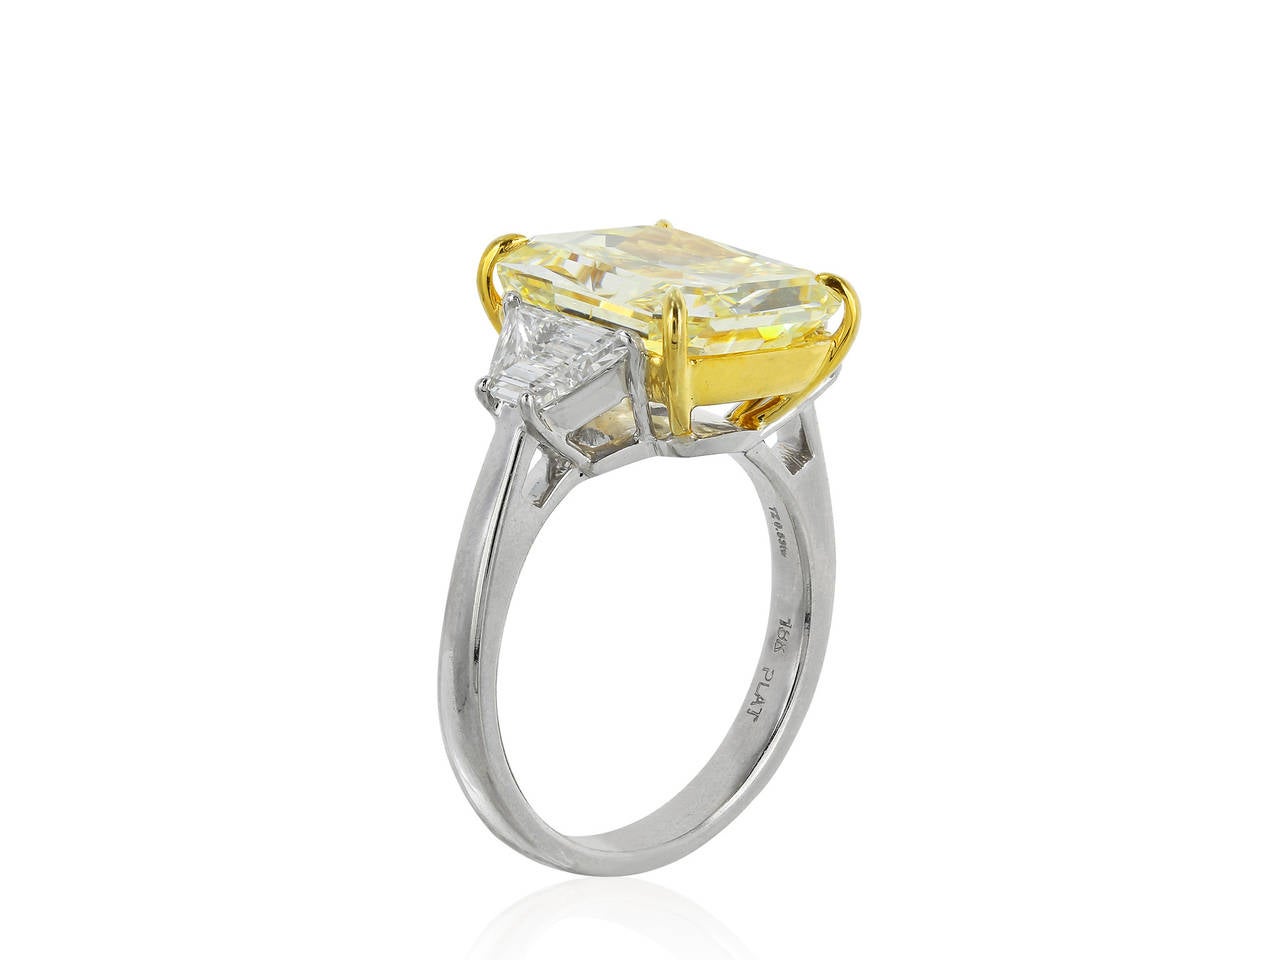 Custom made platinum and 18 karat yellow gold, three stone style engagement ring consisting of 1 radiant cut canary diamond, weighing 7.01 carats, measuring 12.19 x 10.36 x 6.27 mm, having a color and clarity of Fancy Yellow/SI2 with GIA report